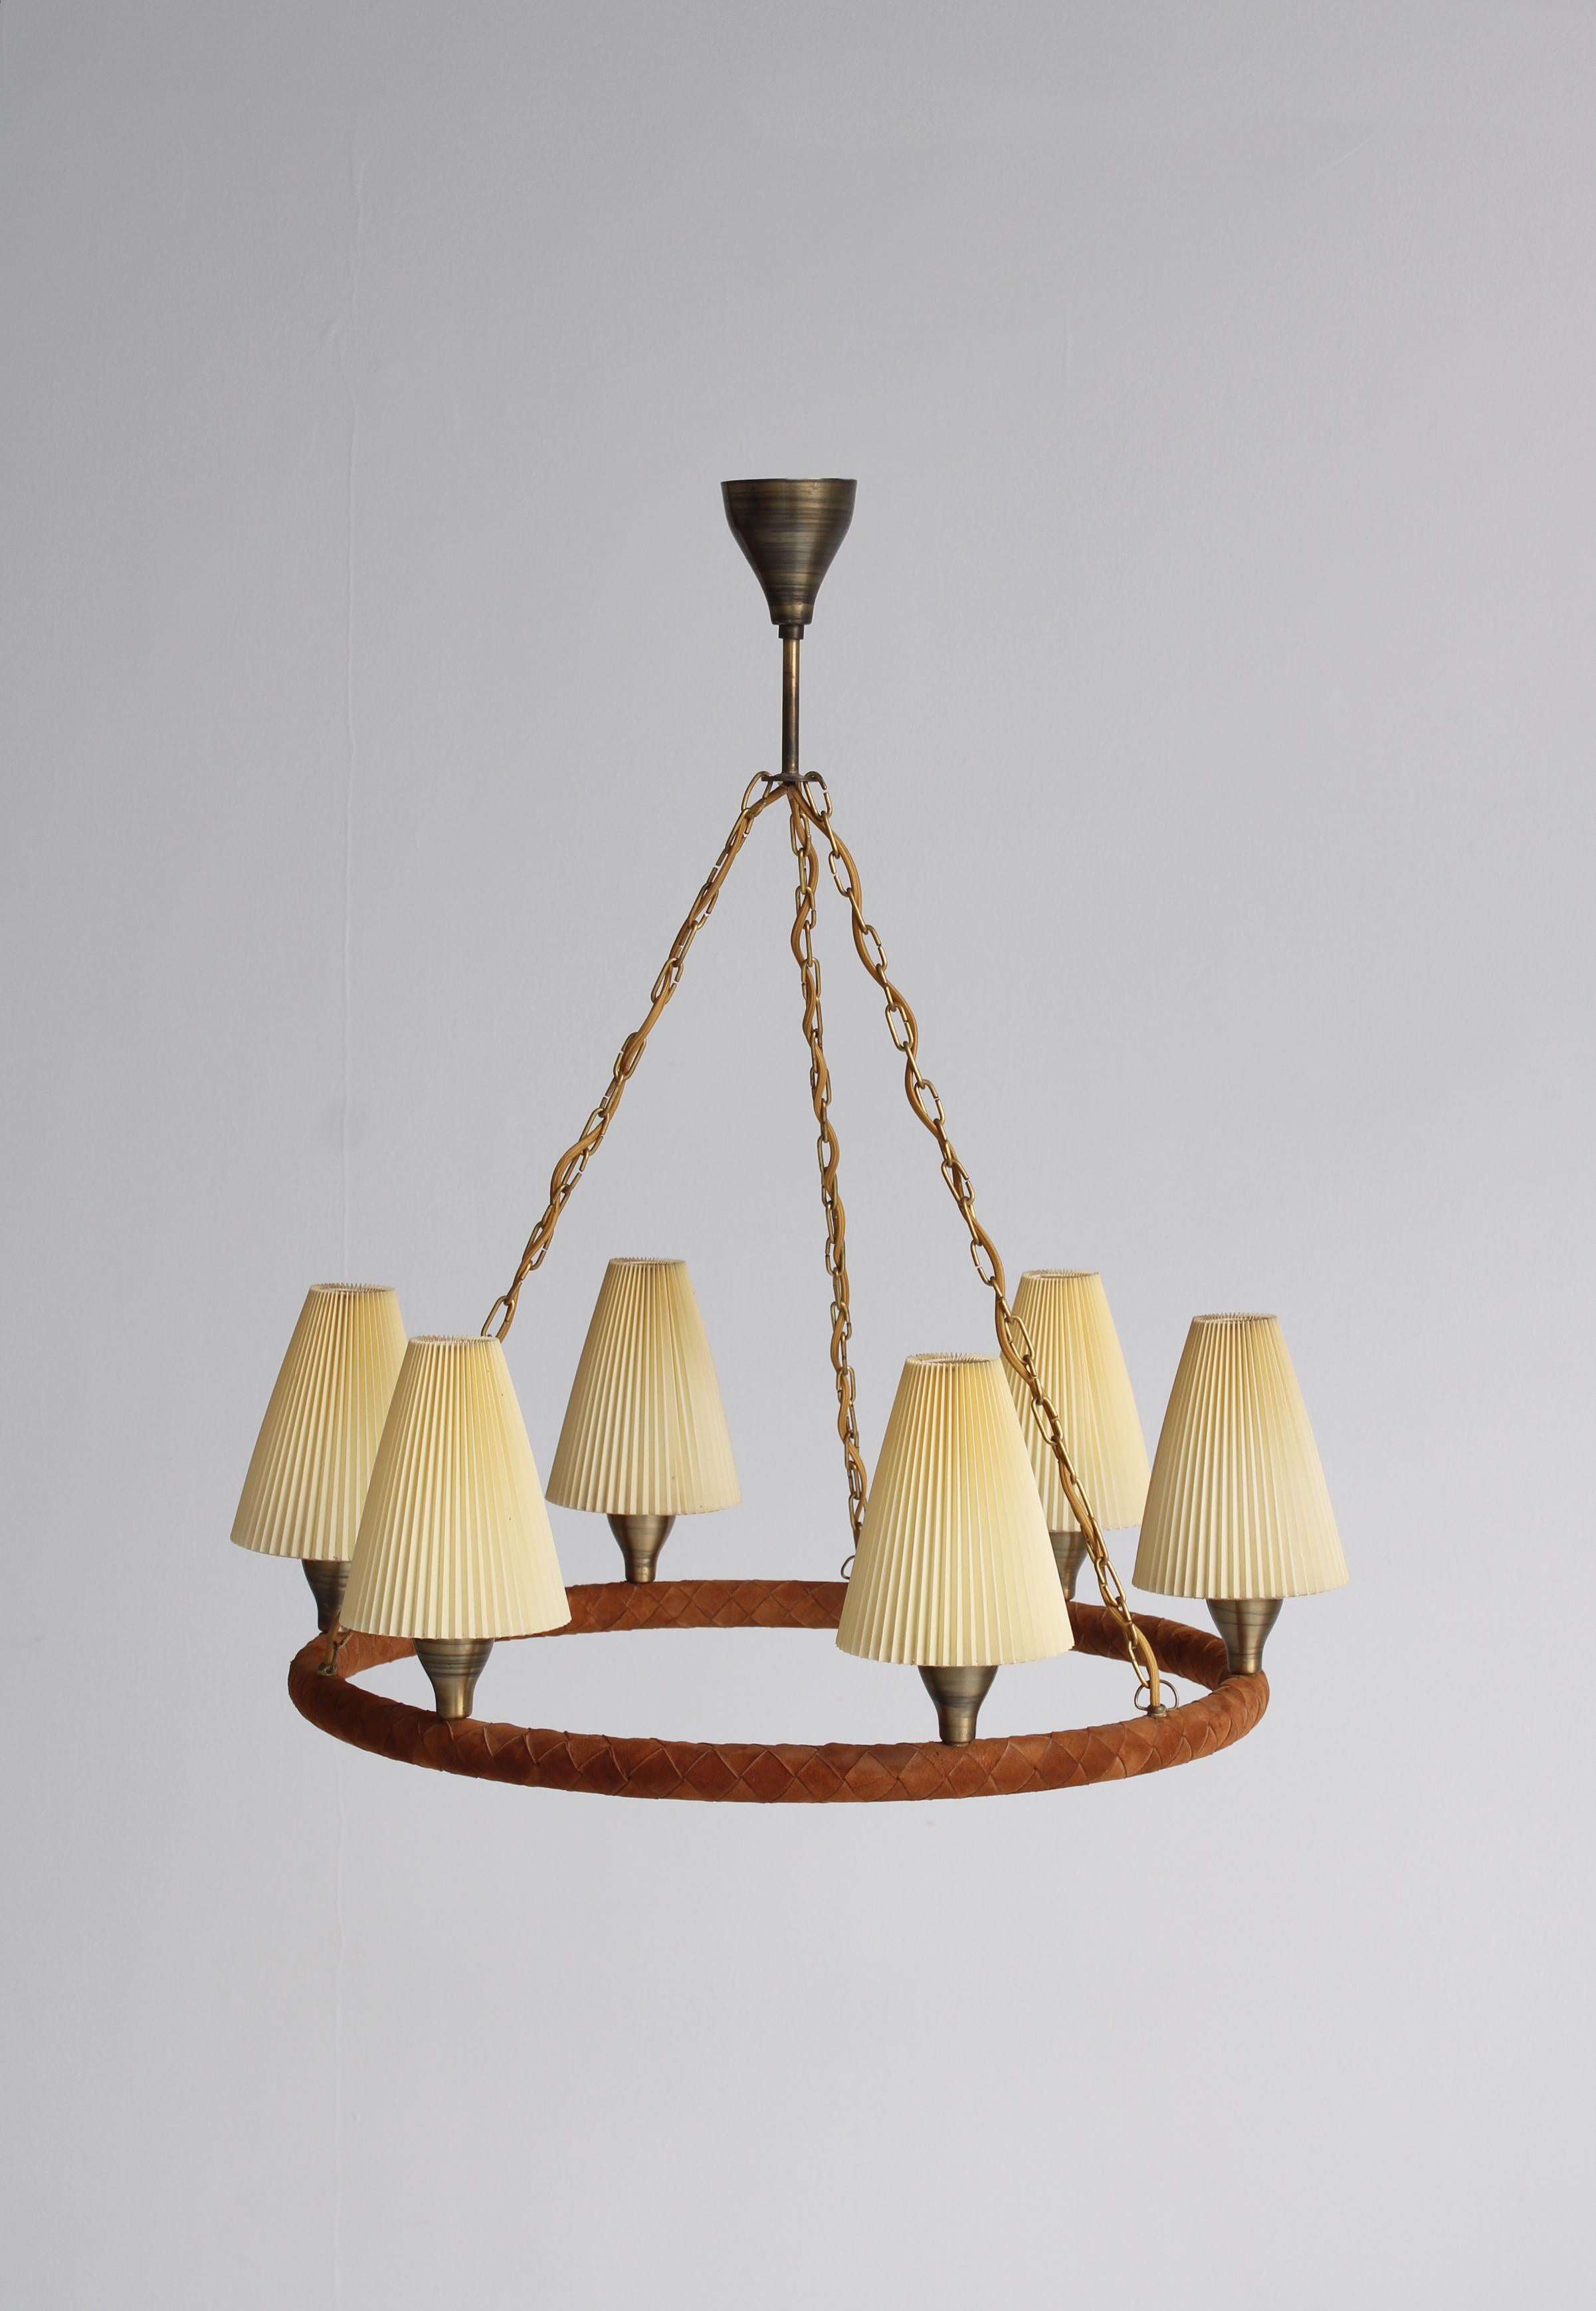 Danish Modern Chandelier in Leather, Brass and Glass by LYFA, Denmark, 1940s For Sale 2